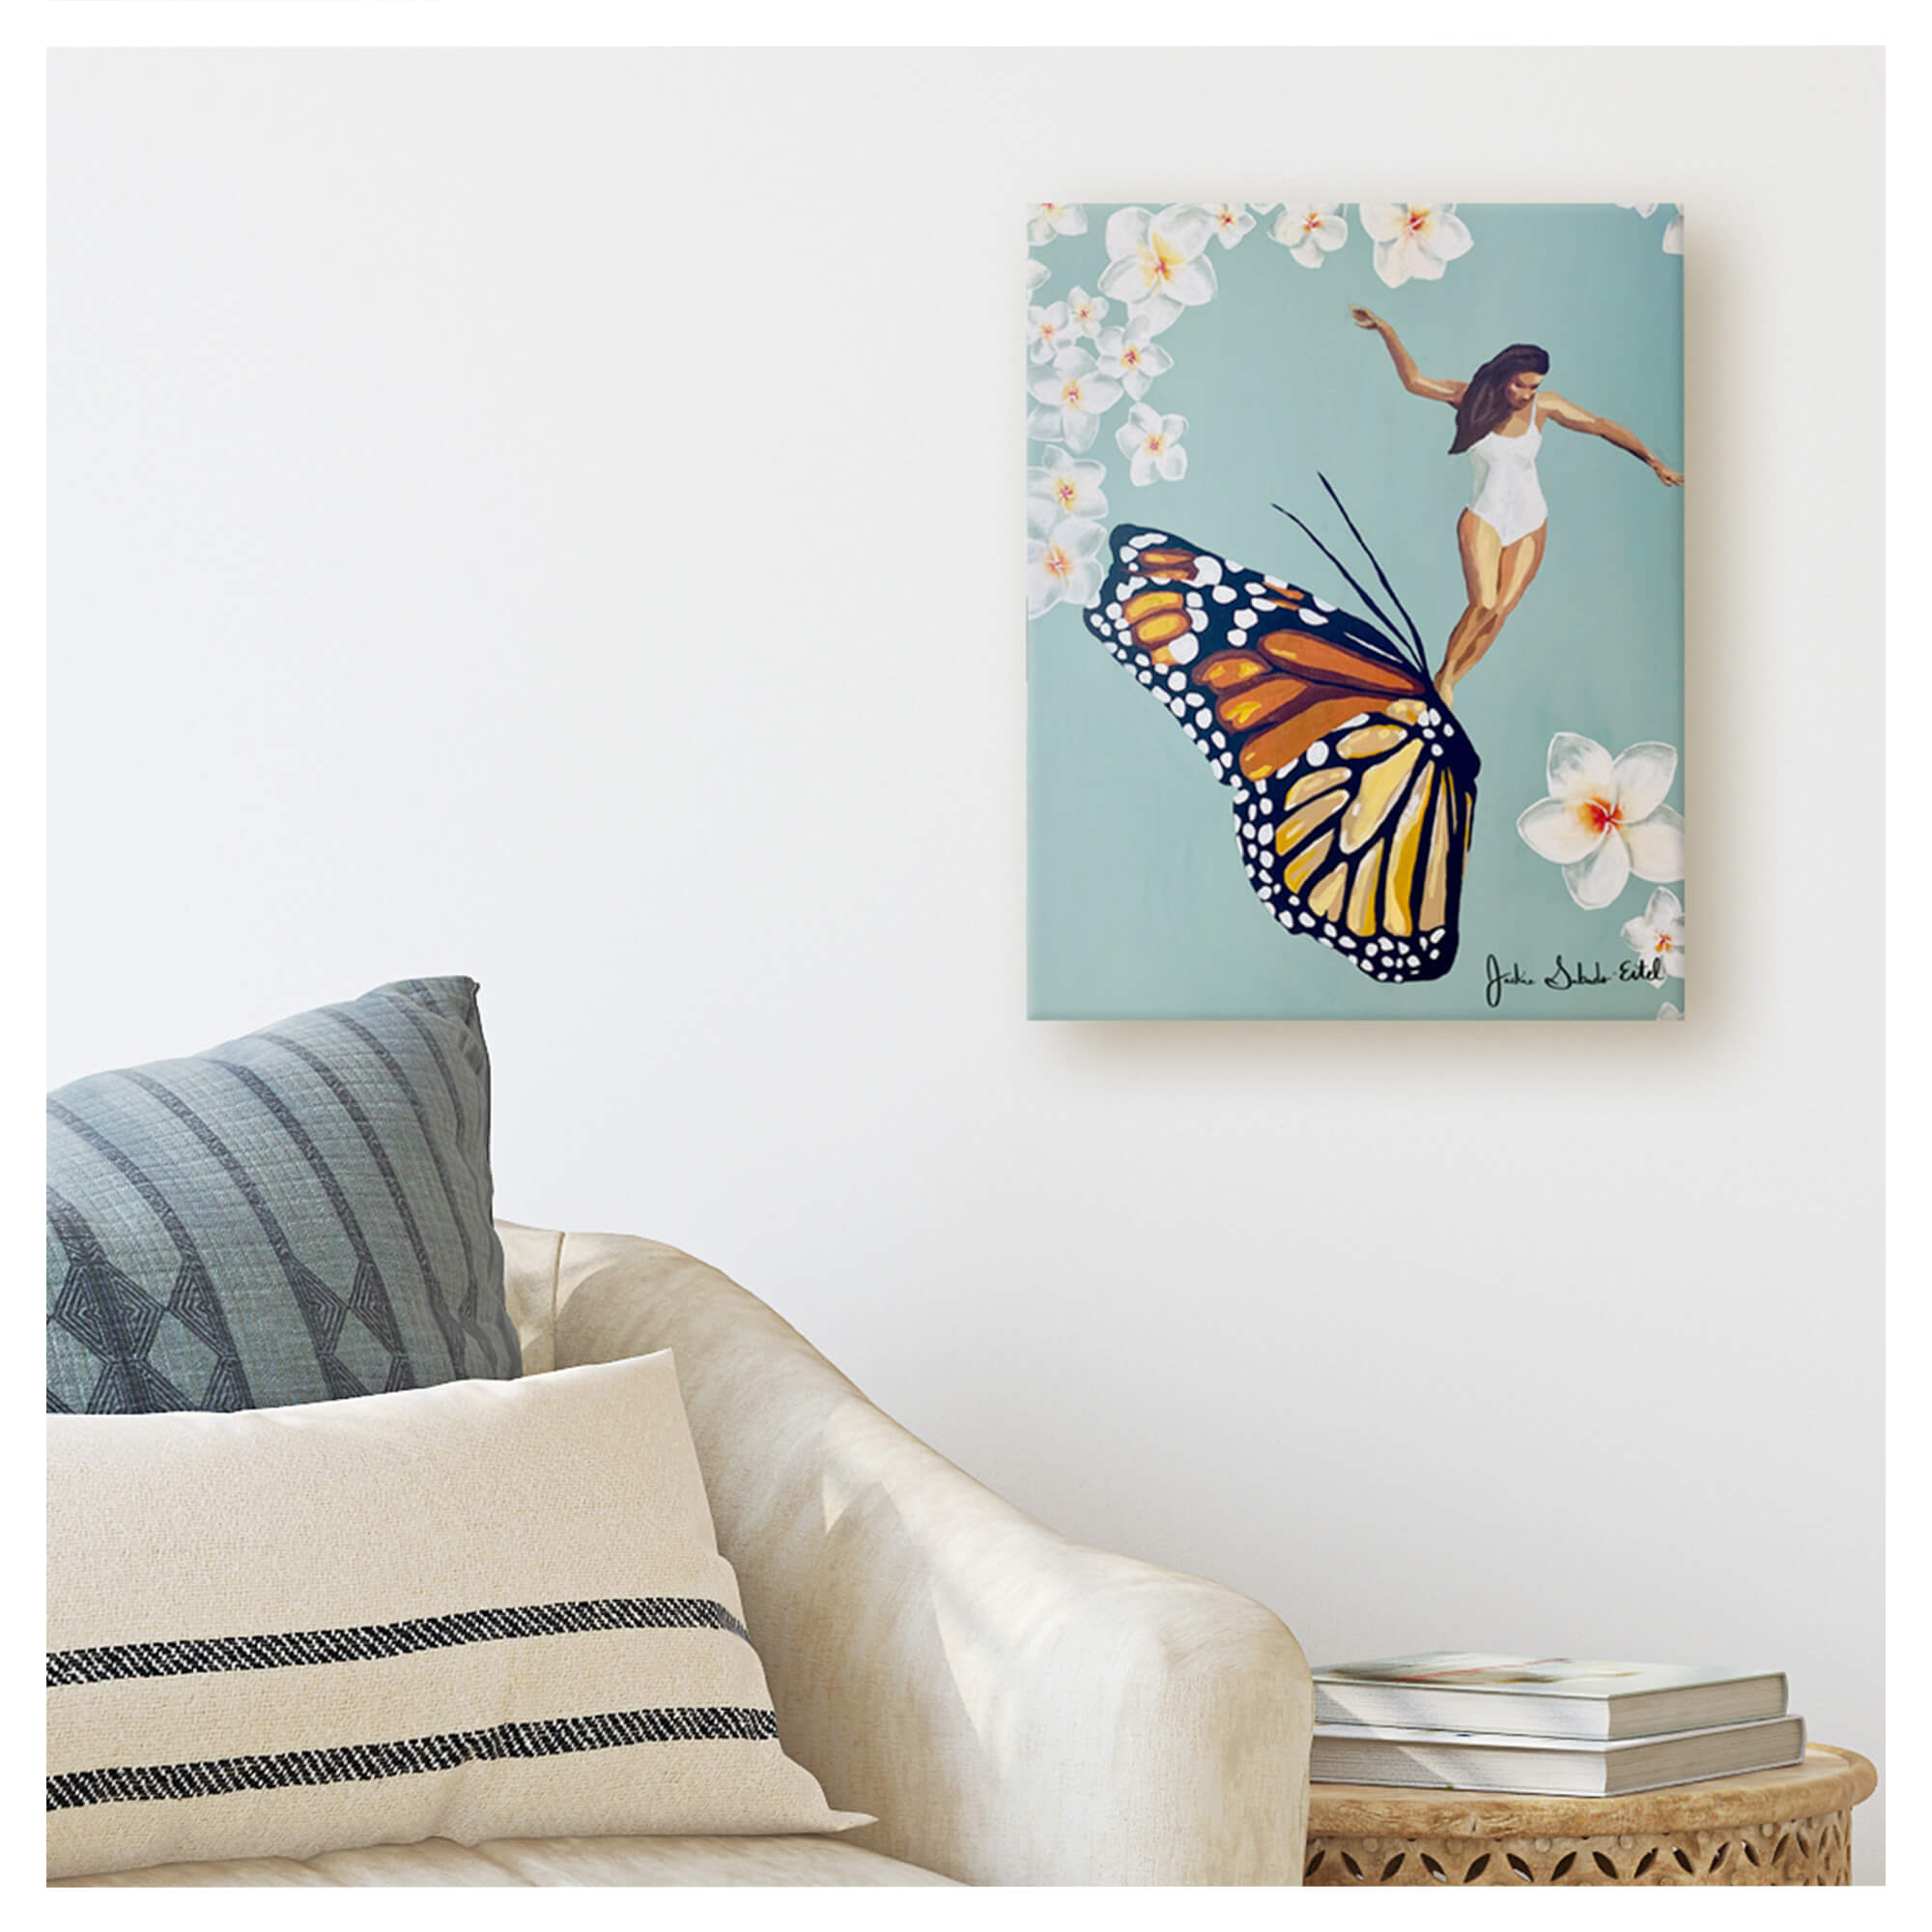 A canvas giclée print featuring a woman riding a butterfly framed by plumeria flowers on a pastel teal-hued background by Hawaii artist Jackie Eitel